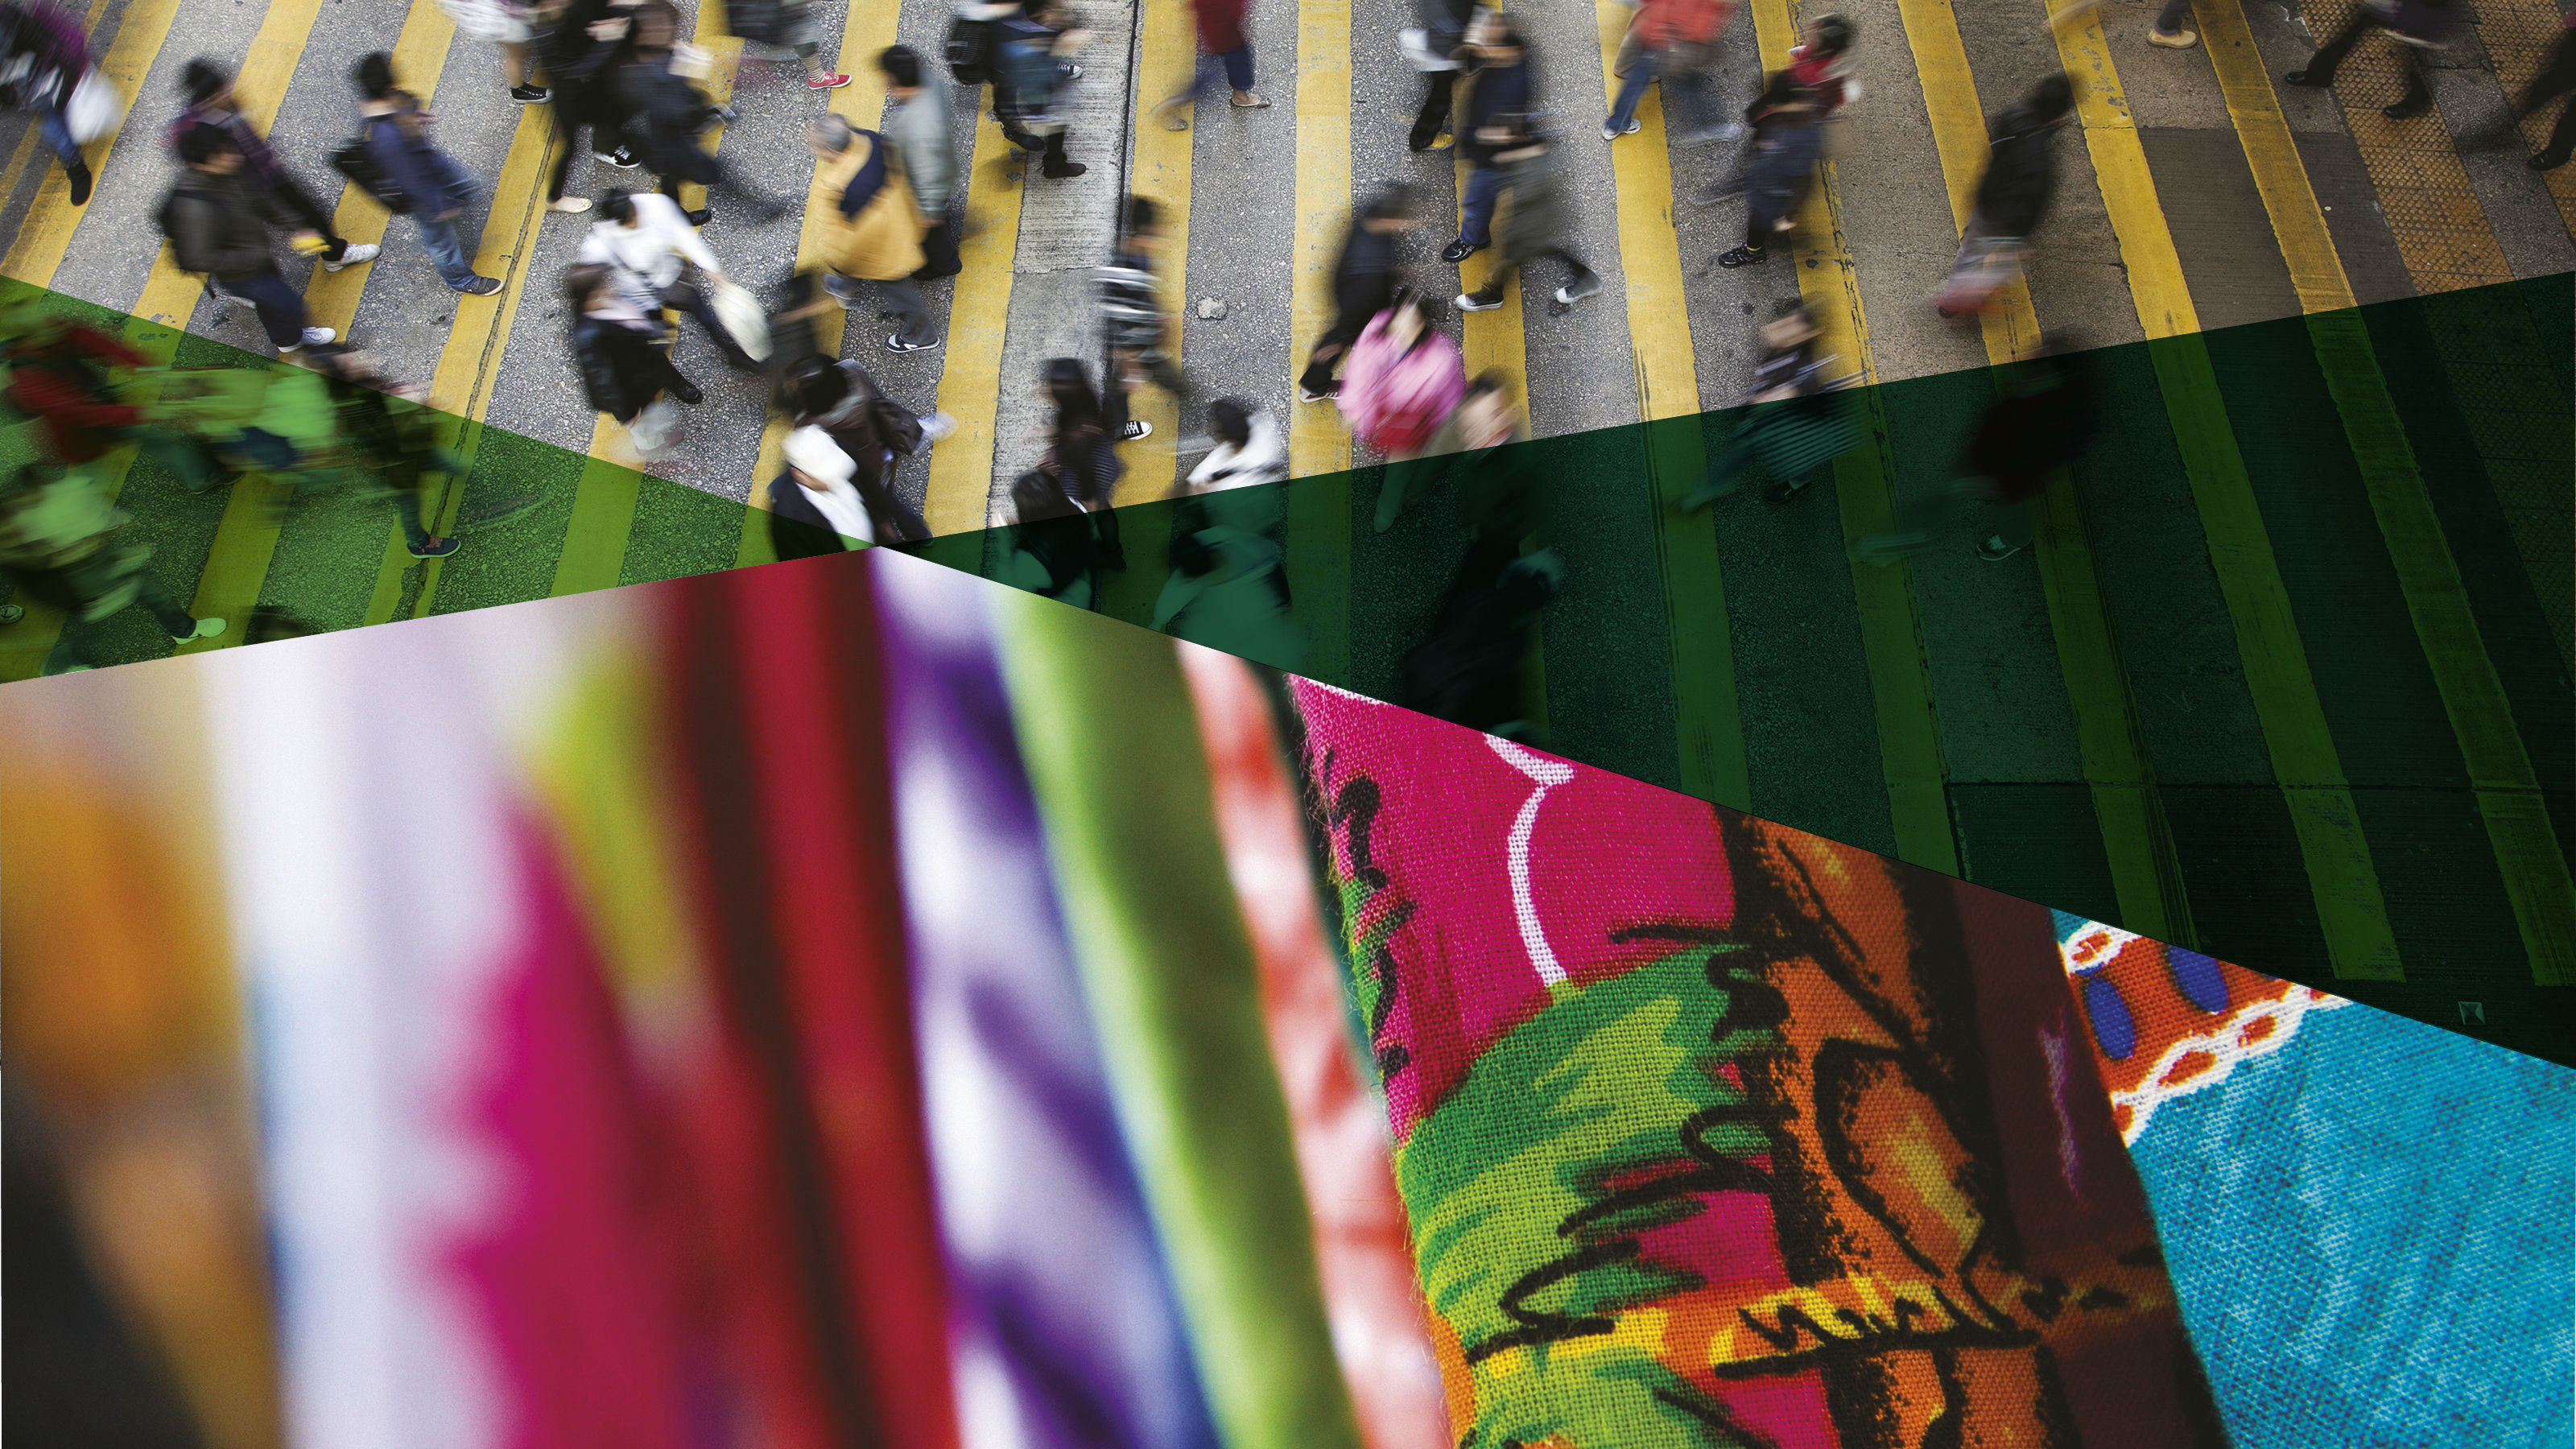 Building Cultural Competency - A close up image of colourful fabric and a blurred image of people crossing a street.